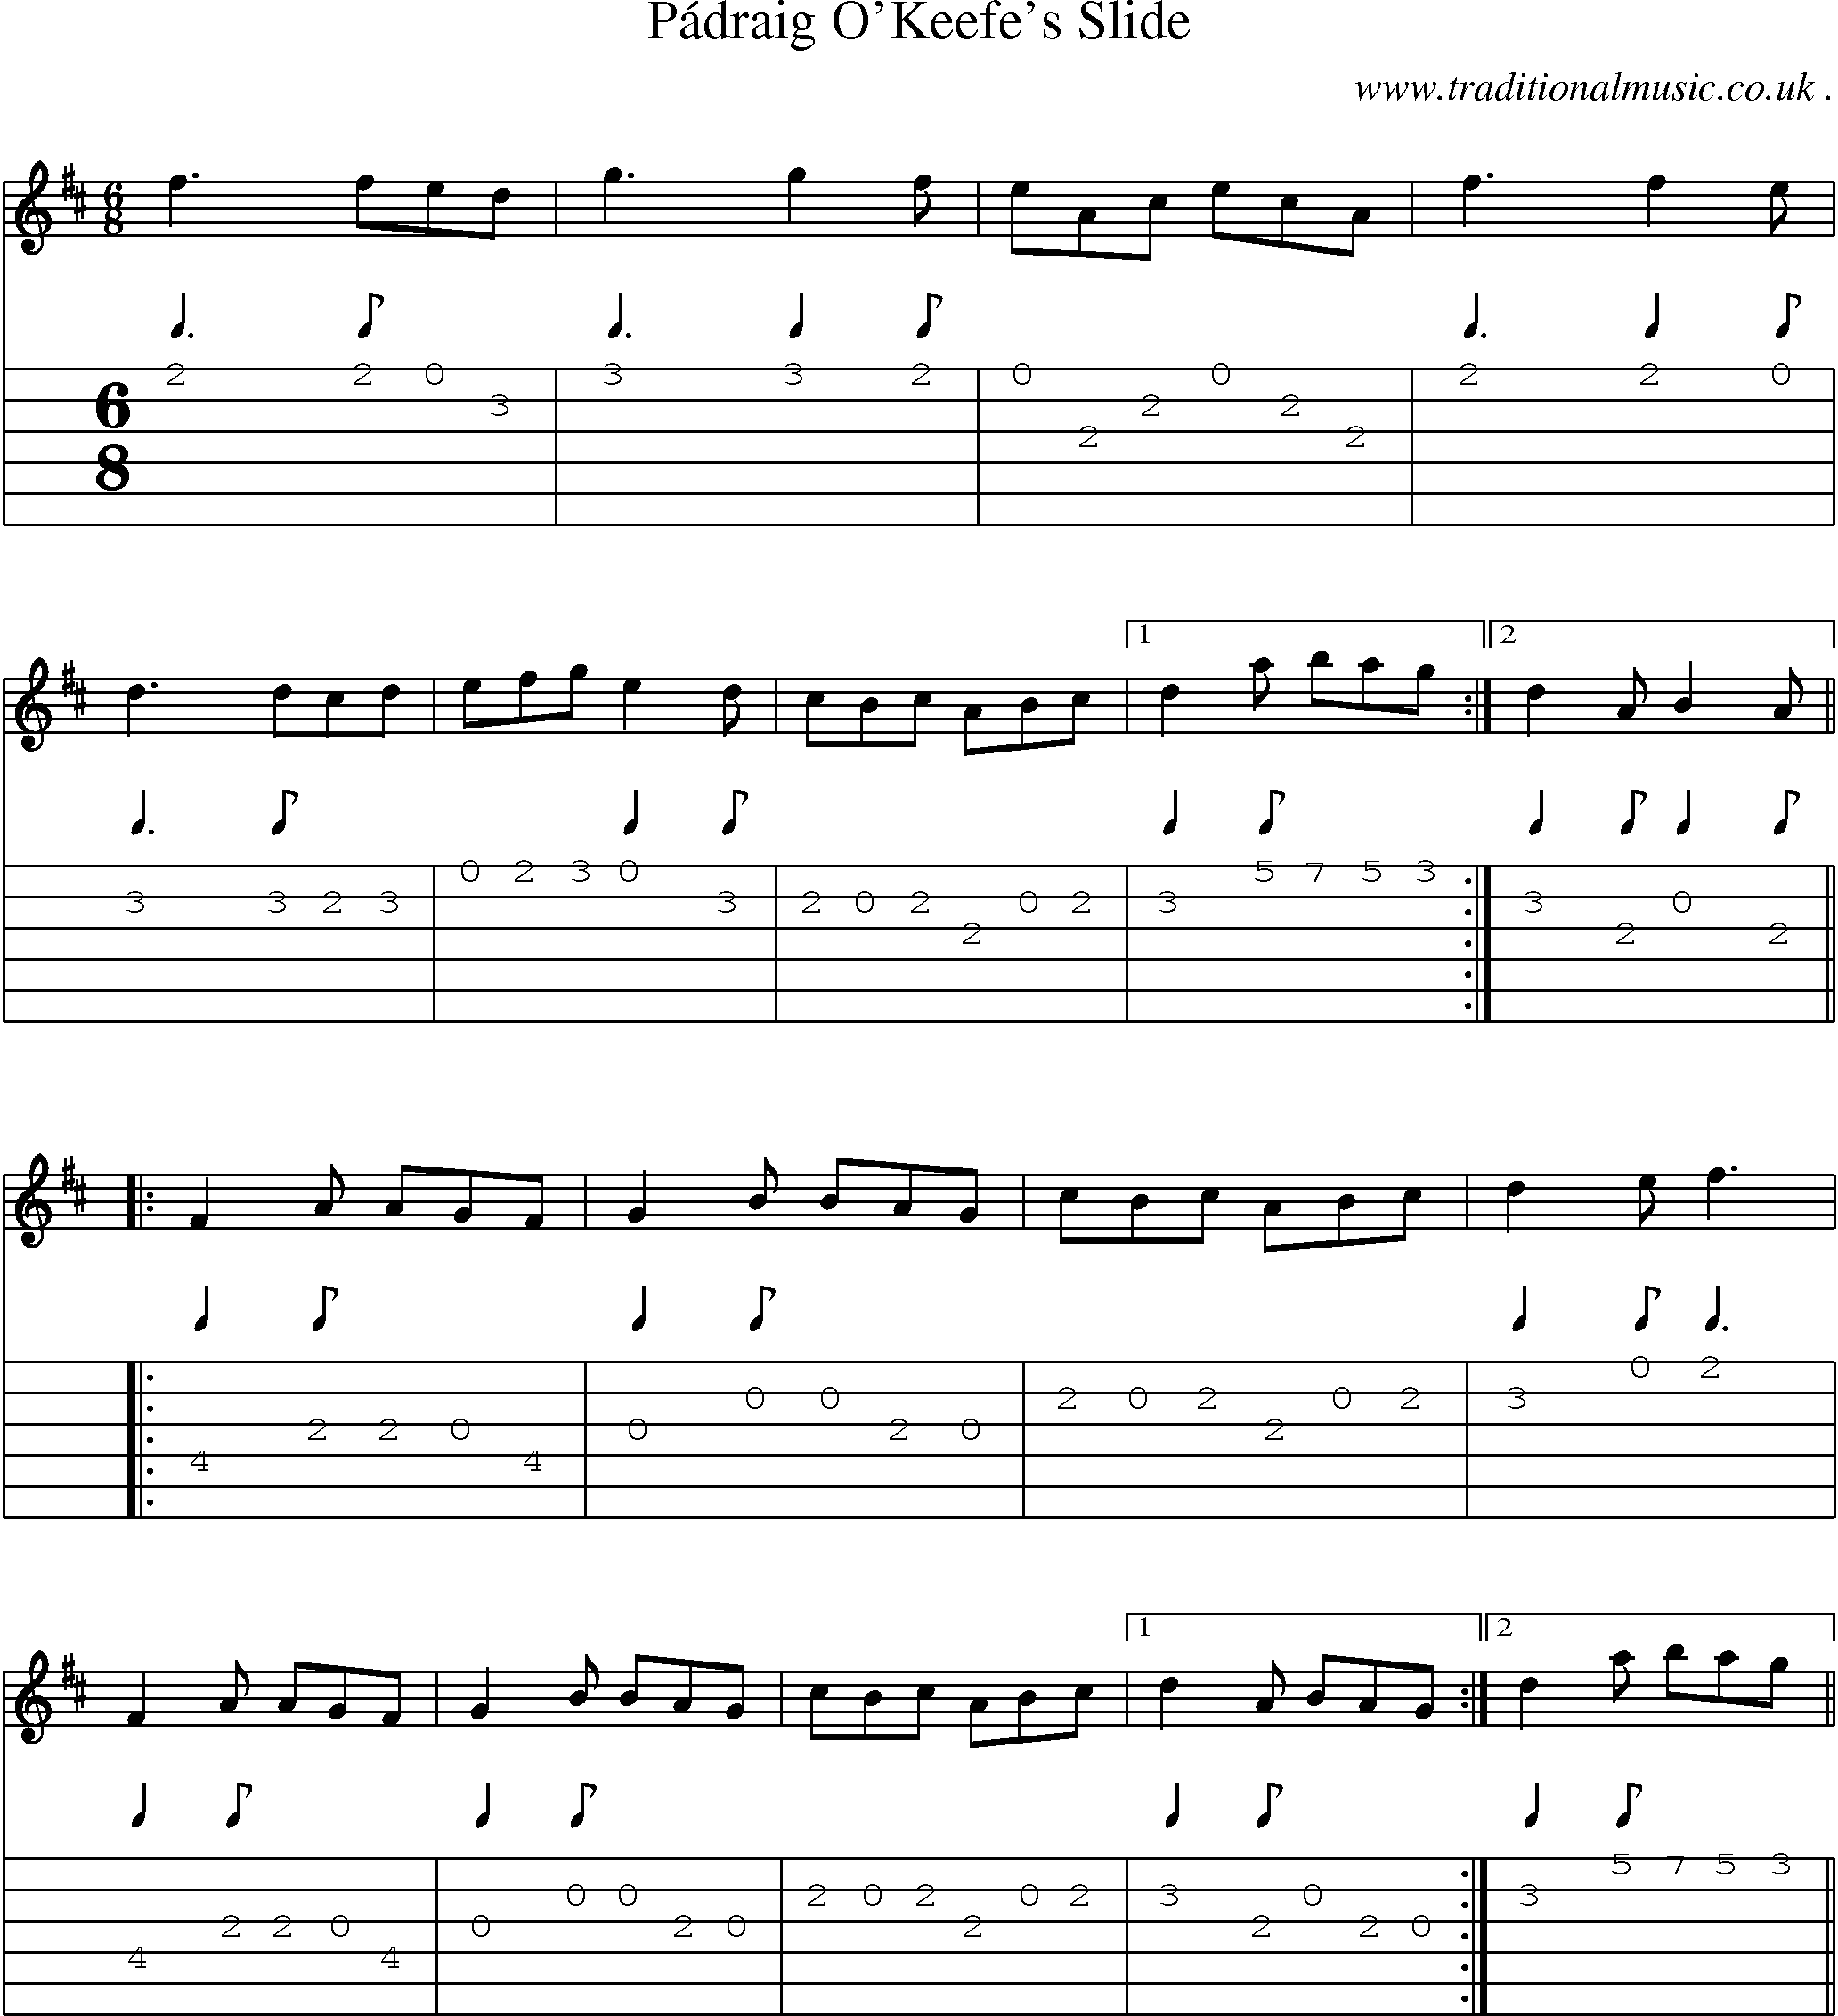 Sheet-Music and Guitar Tabs for Padraig Okeefes Slide